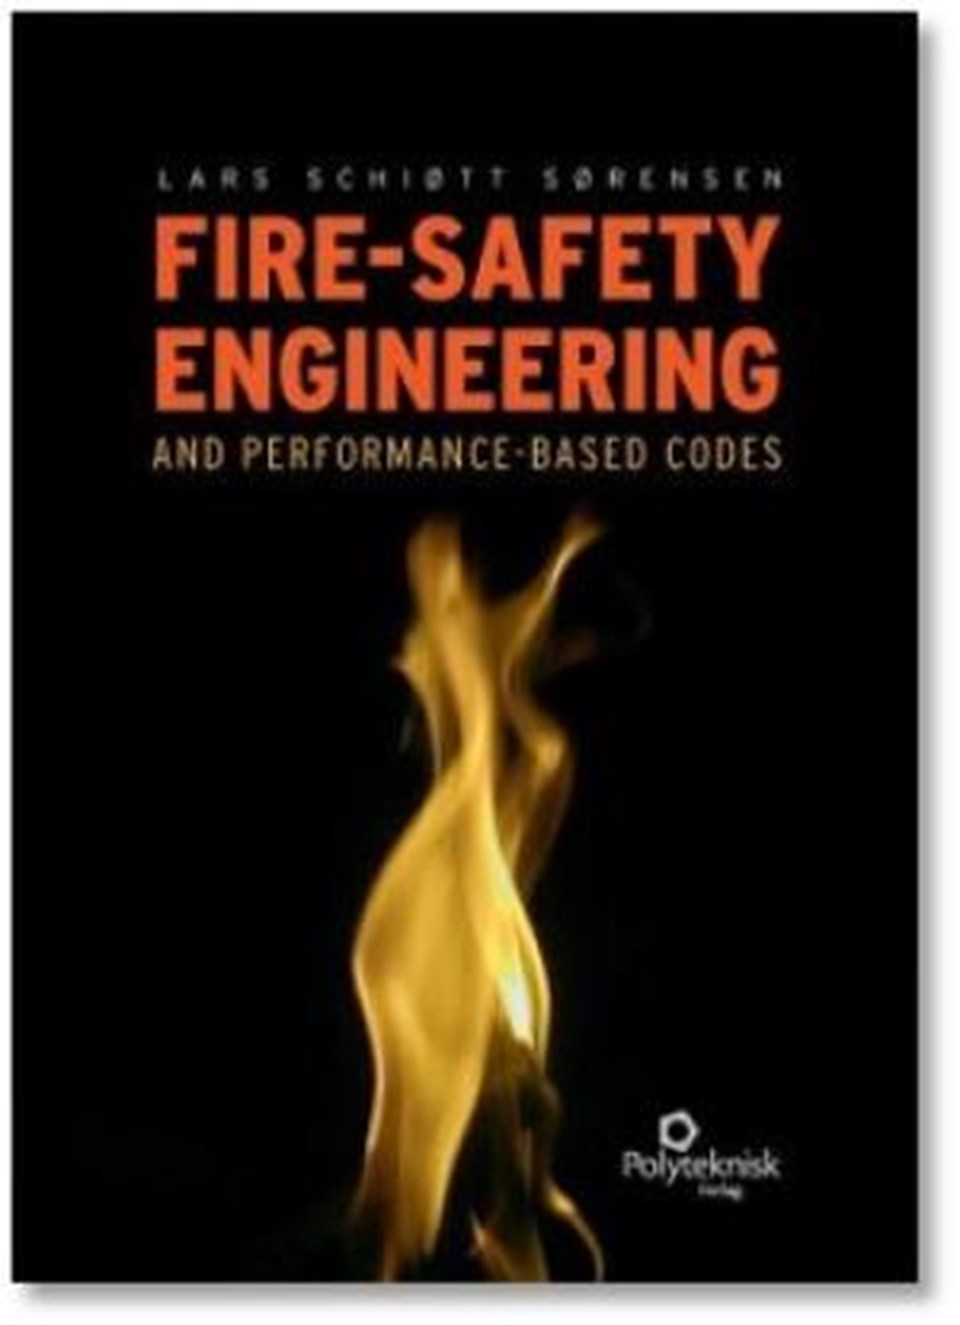 Fire-safety engineering and performancebased codes